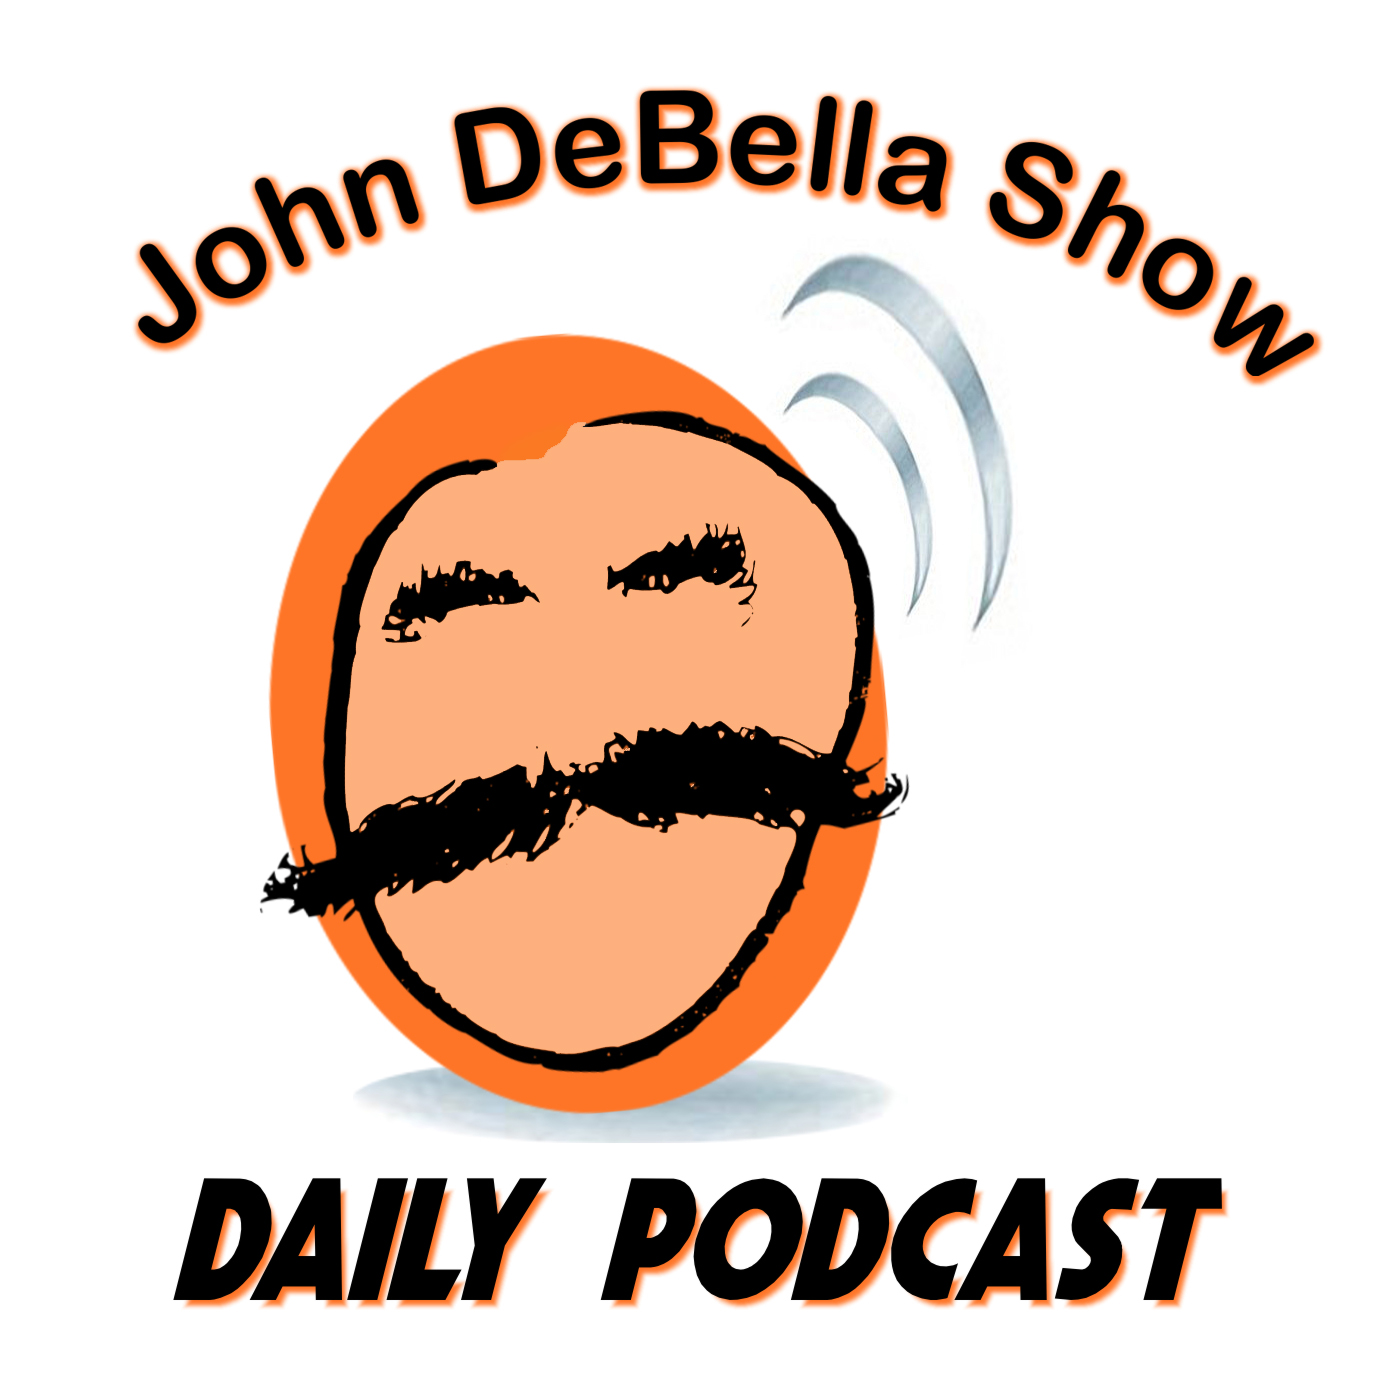 The Daily Podcast (06/17/21)